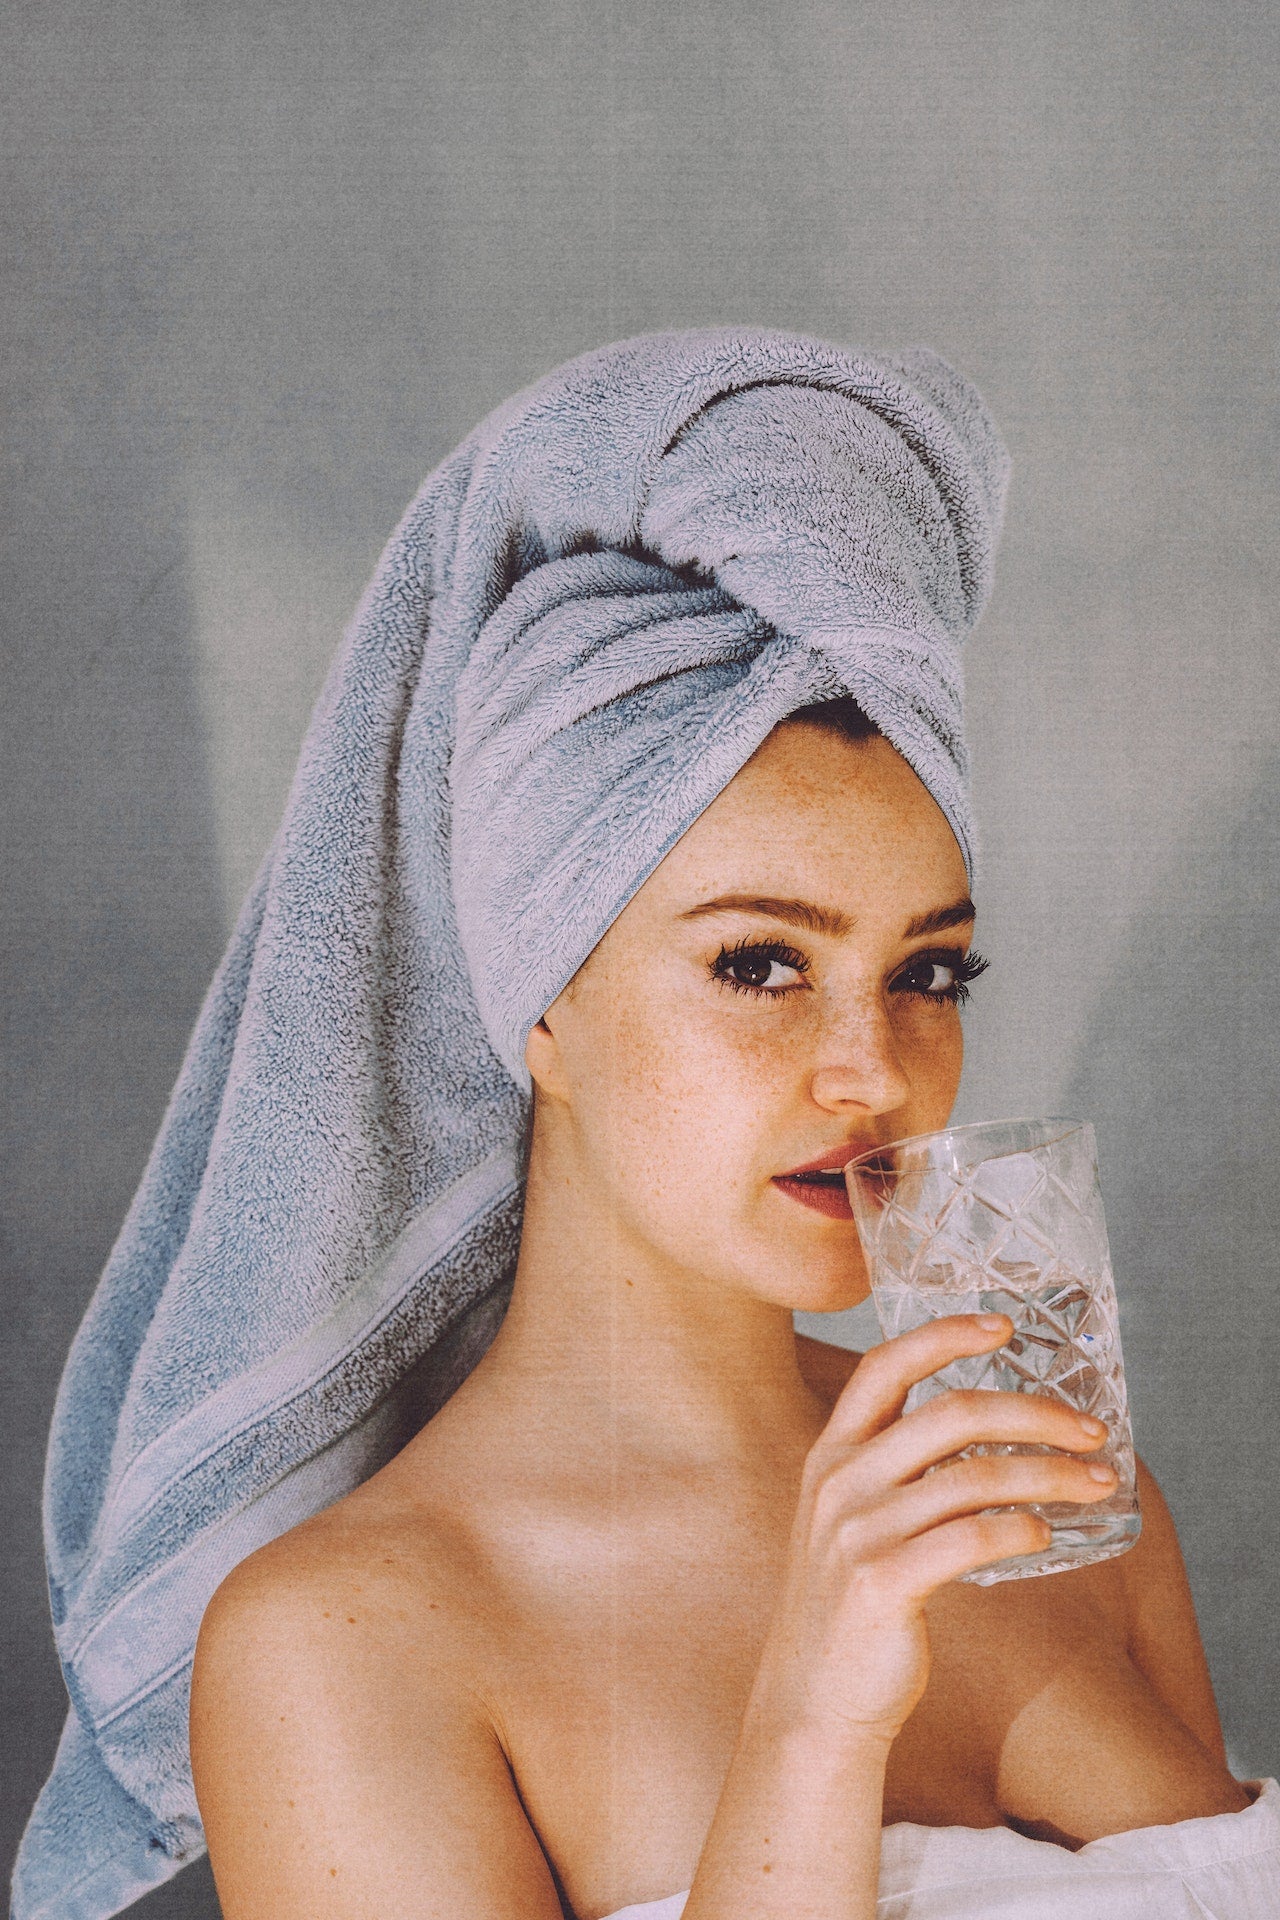 Rinse-Free & Waterless Beauty: What It Means + Why It Matters In 2023